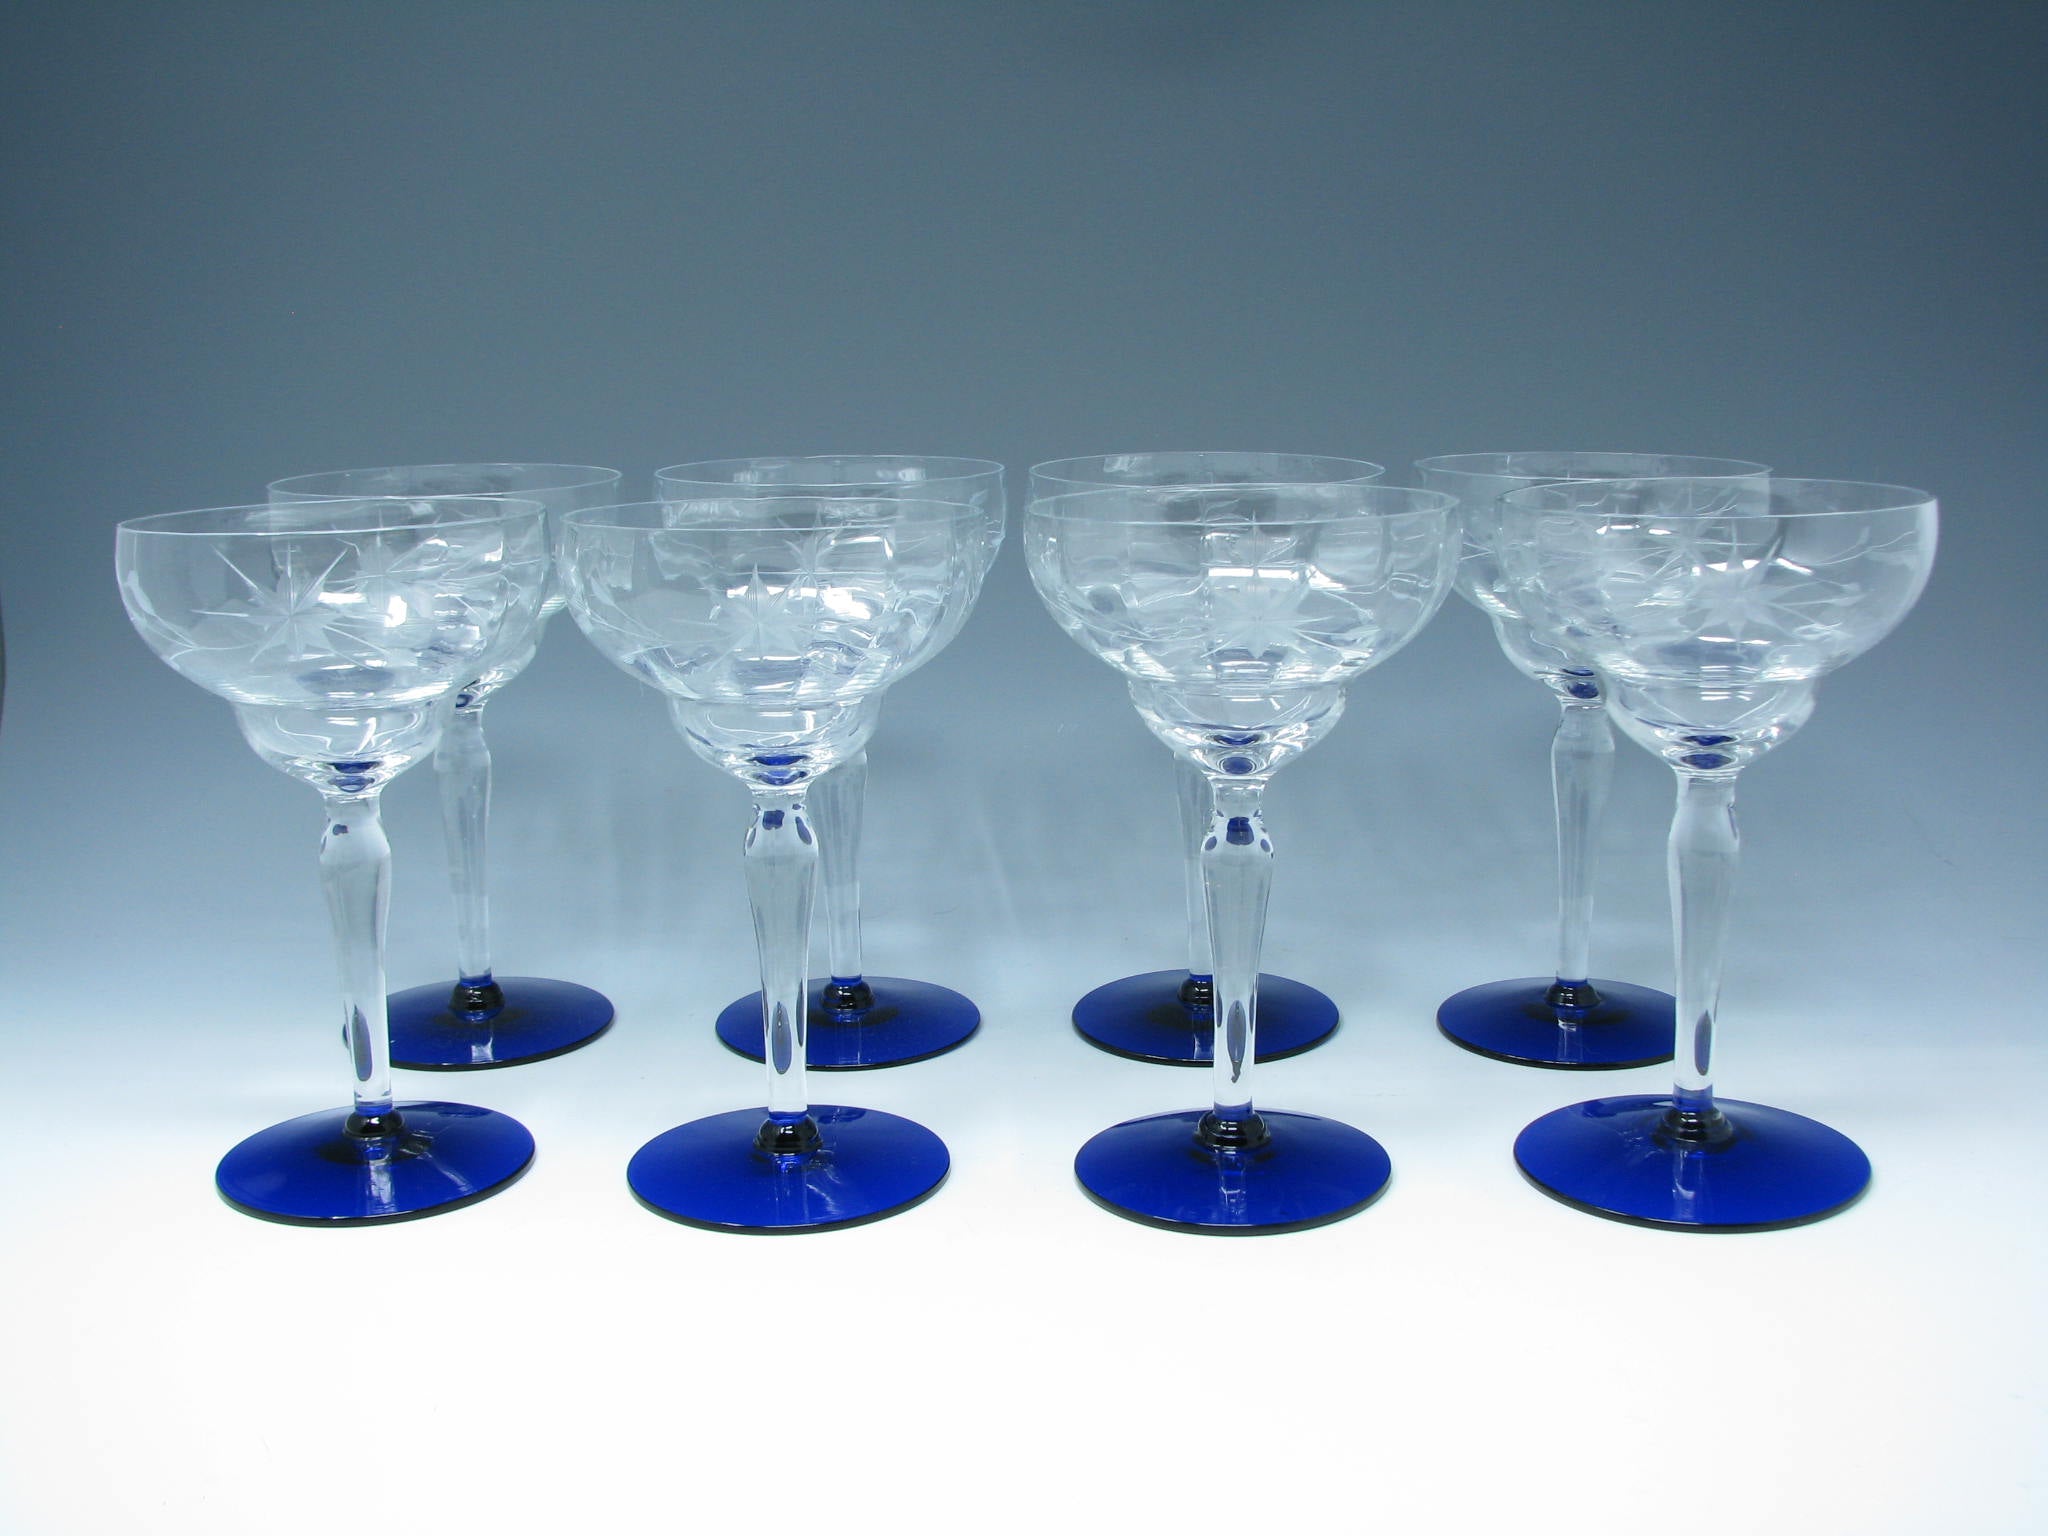 edgebrookhouse - Vintage 1930s Weston Cut Glass Champagne Sherbet Goblets with Floral Design and Cobalt Foot - 8 Pieces